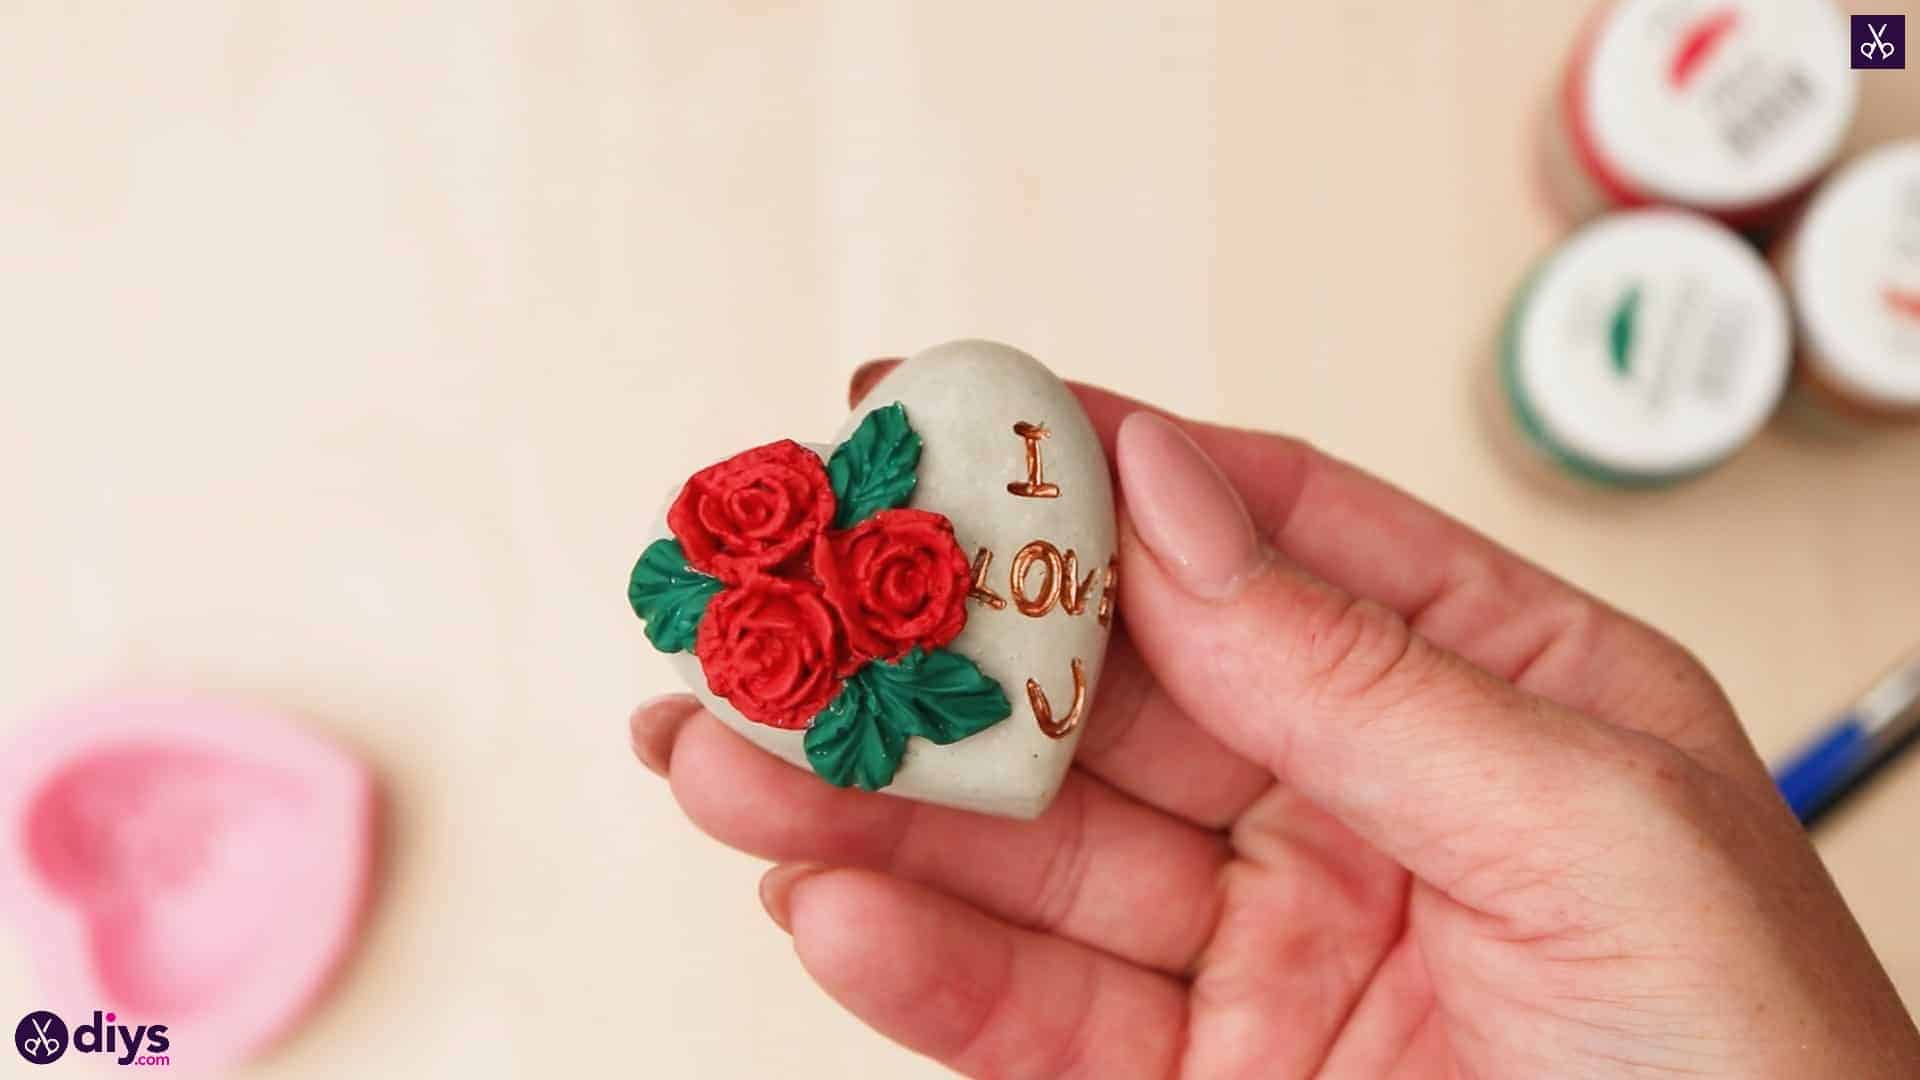 Diy concrete heart and roses roses